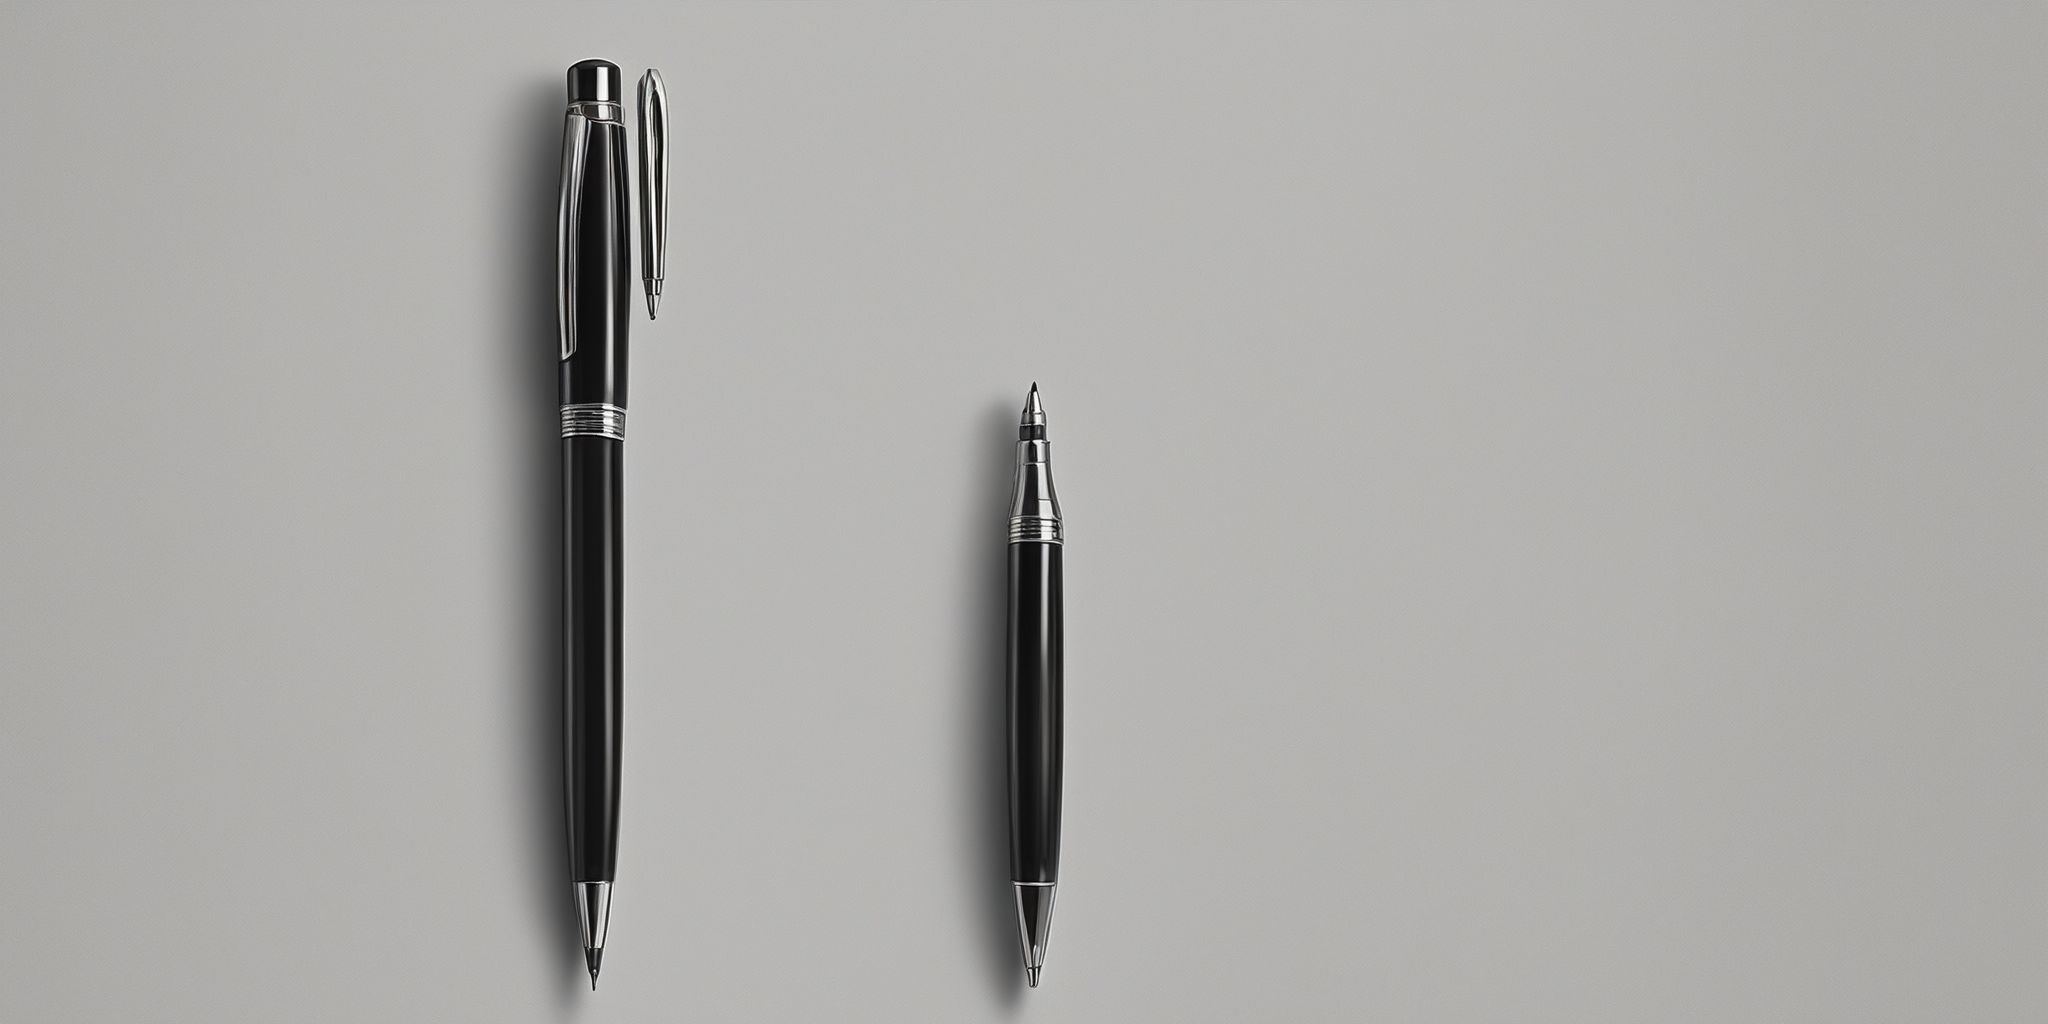 Pen  in realistic, photographic style